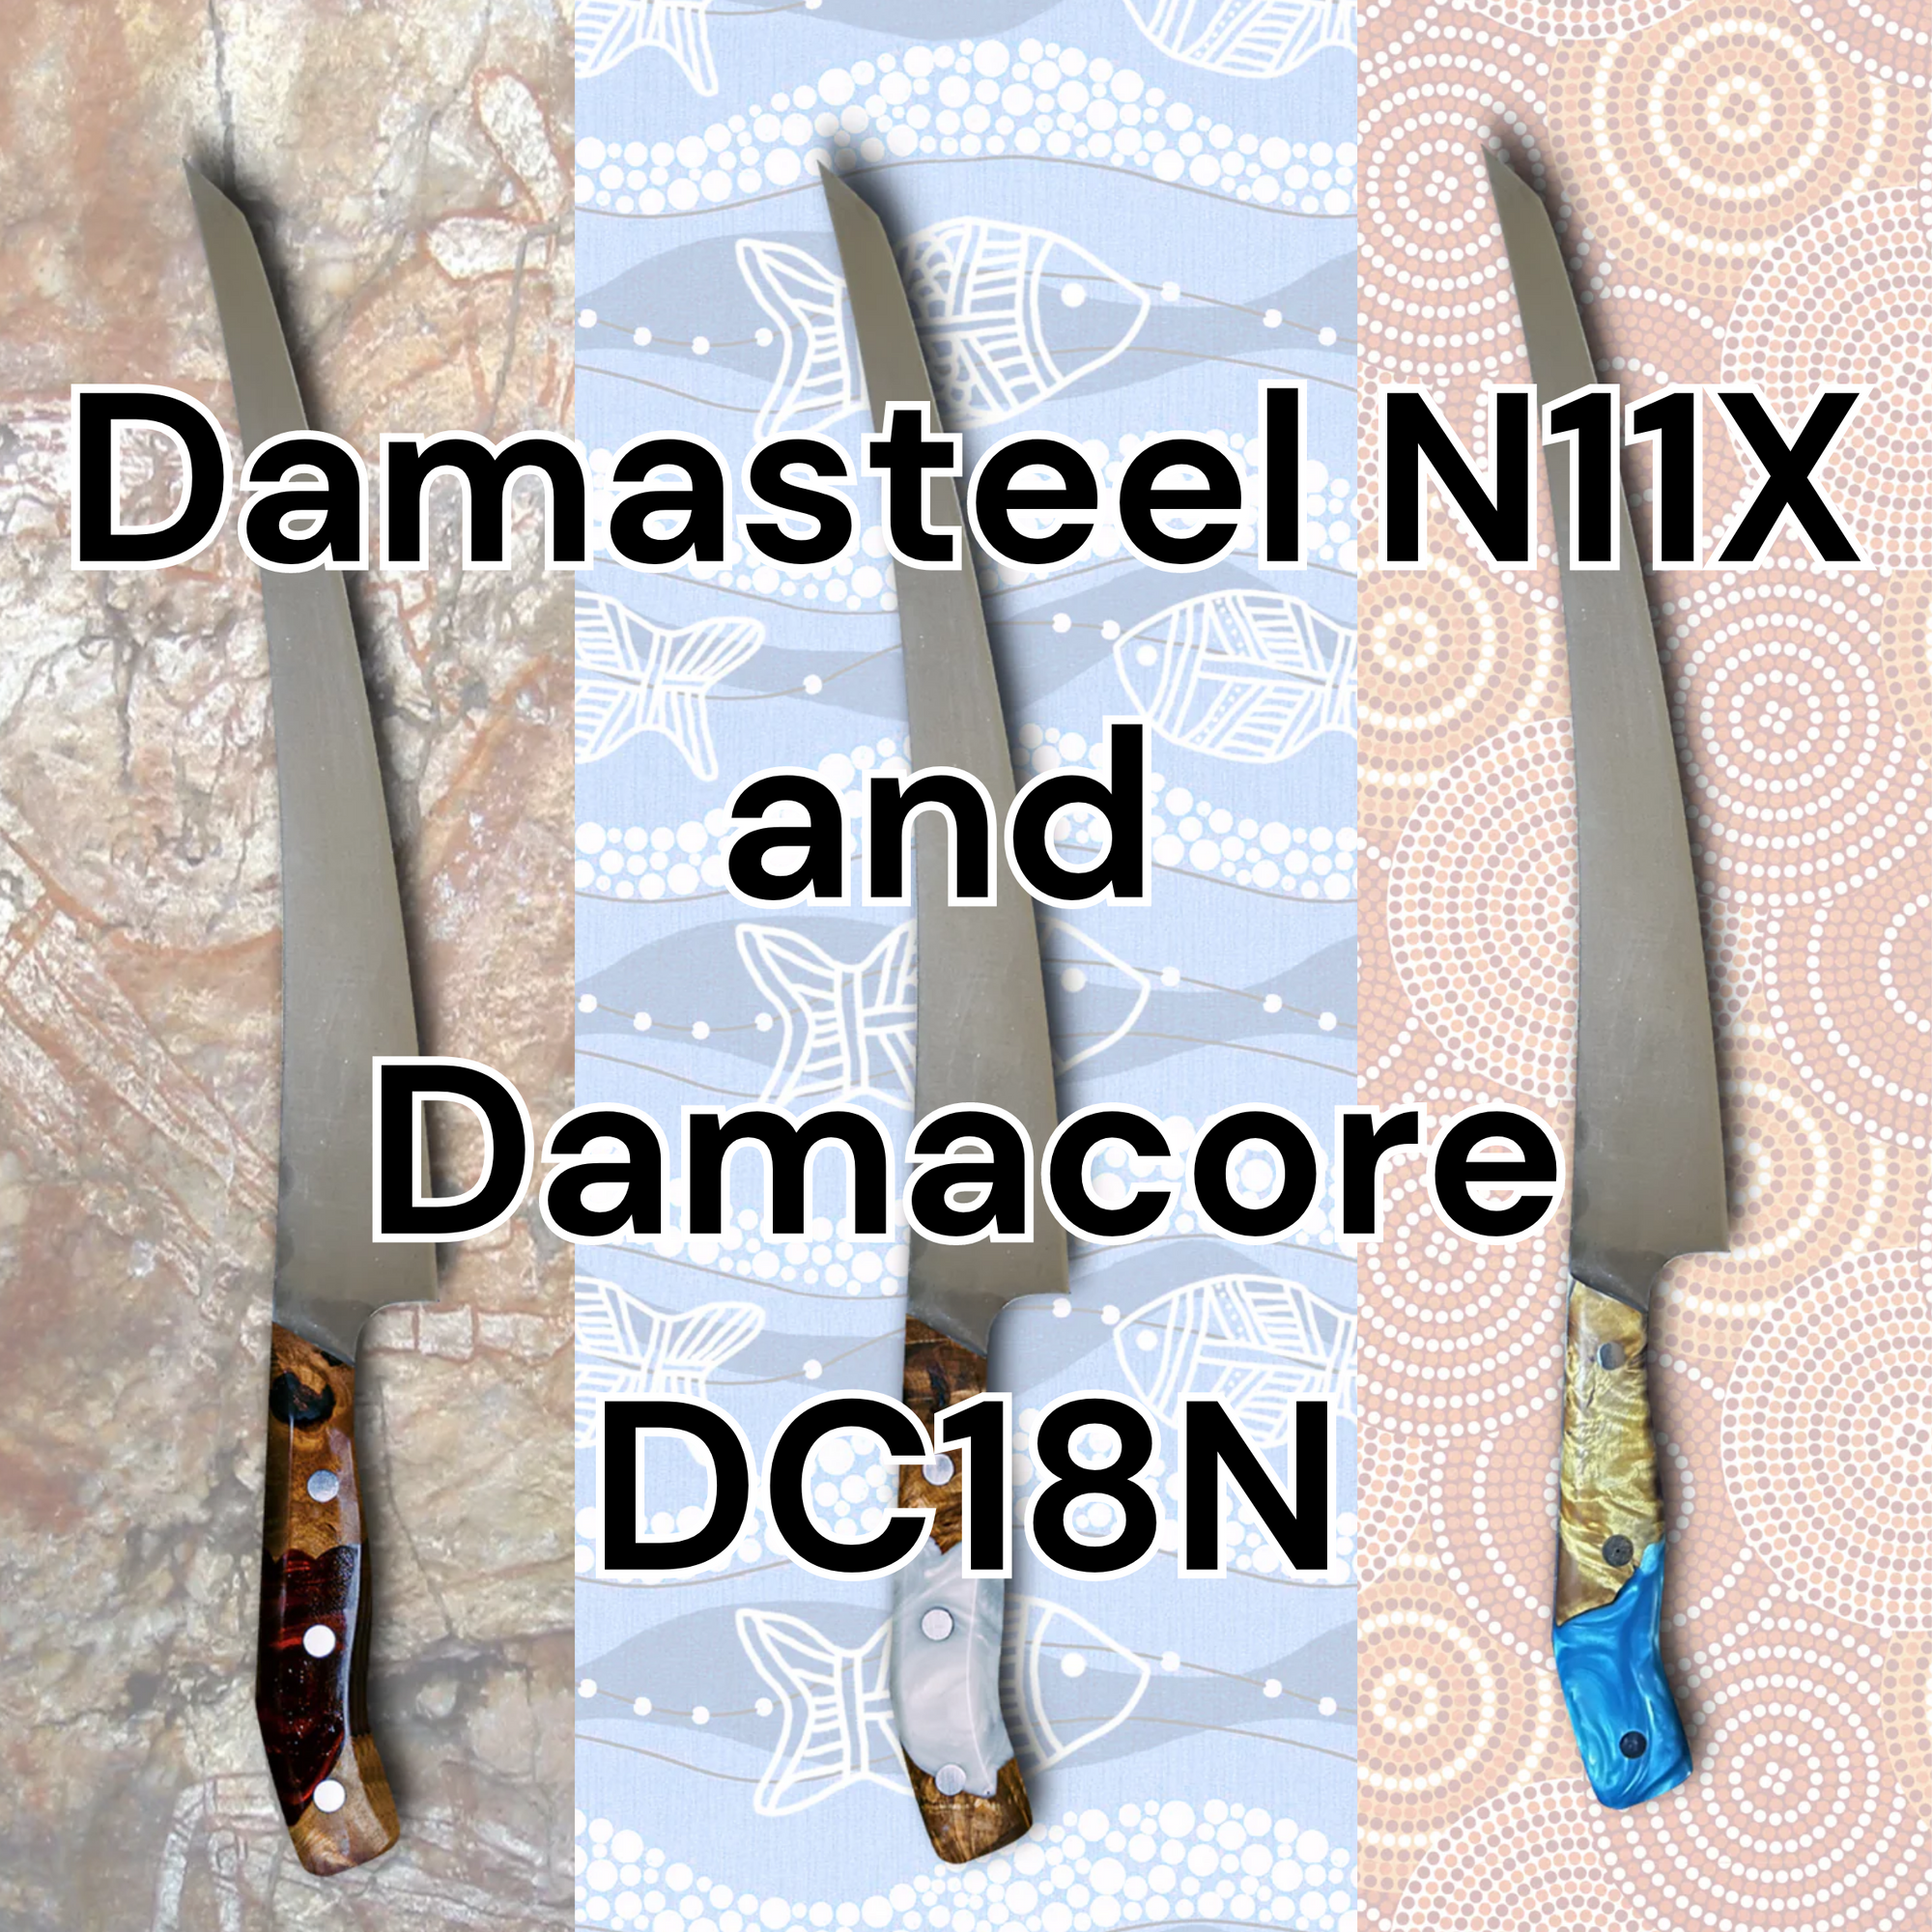 Damasteel N11X and Damacore DC18N for High-end Kitchen Knives